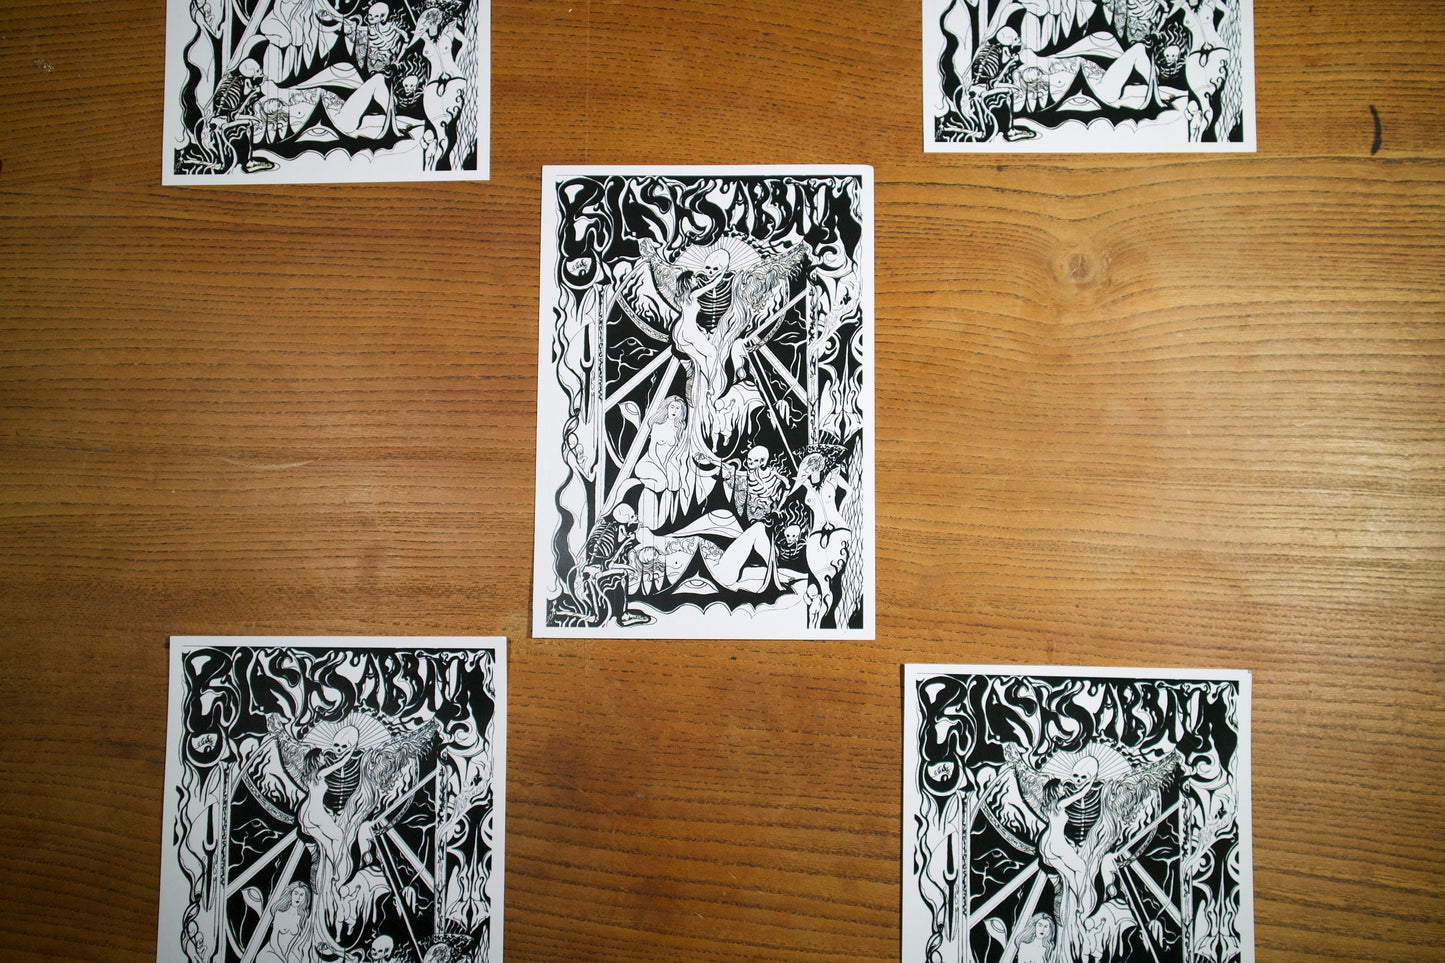 6 A5 prints of  A black and white gothic pen and ink poster for the band black sabbath in an art nouveau style showing a black mass conducted by demons and Skelletons